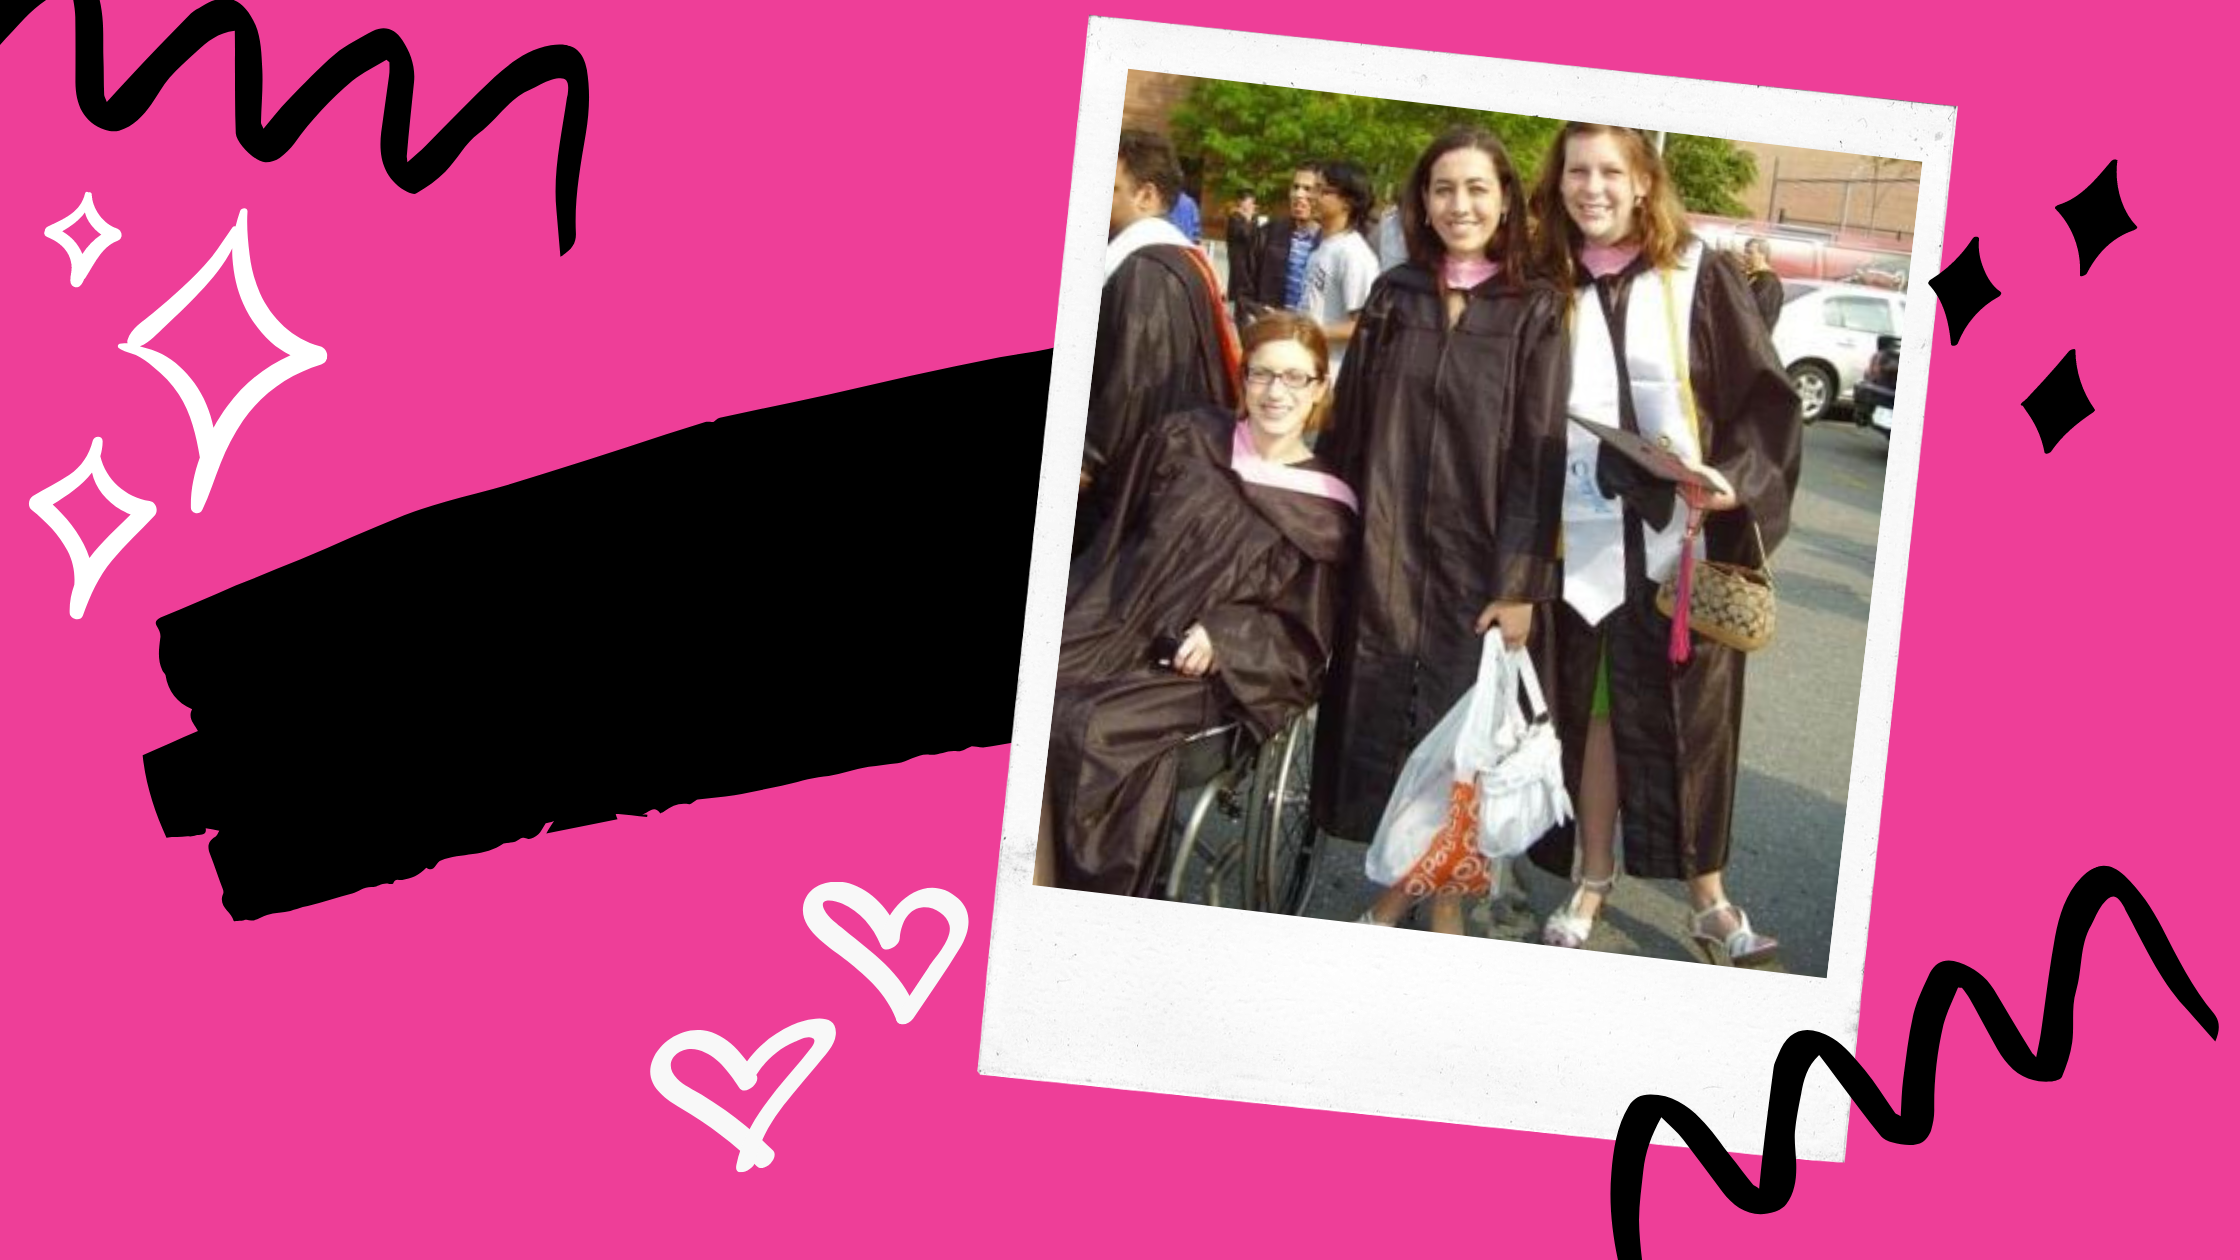 Image shows three young women in black graduation gowns. Two of the girls are standing and the one on the left is sitting in a wheelchair (the author). The image is a photo in front of a pink background with black and white squiggles and shapes decorated around it.